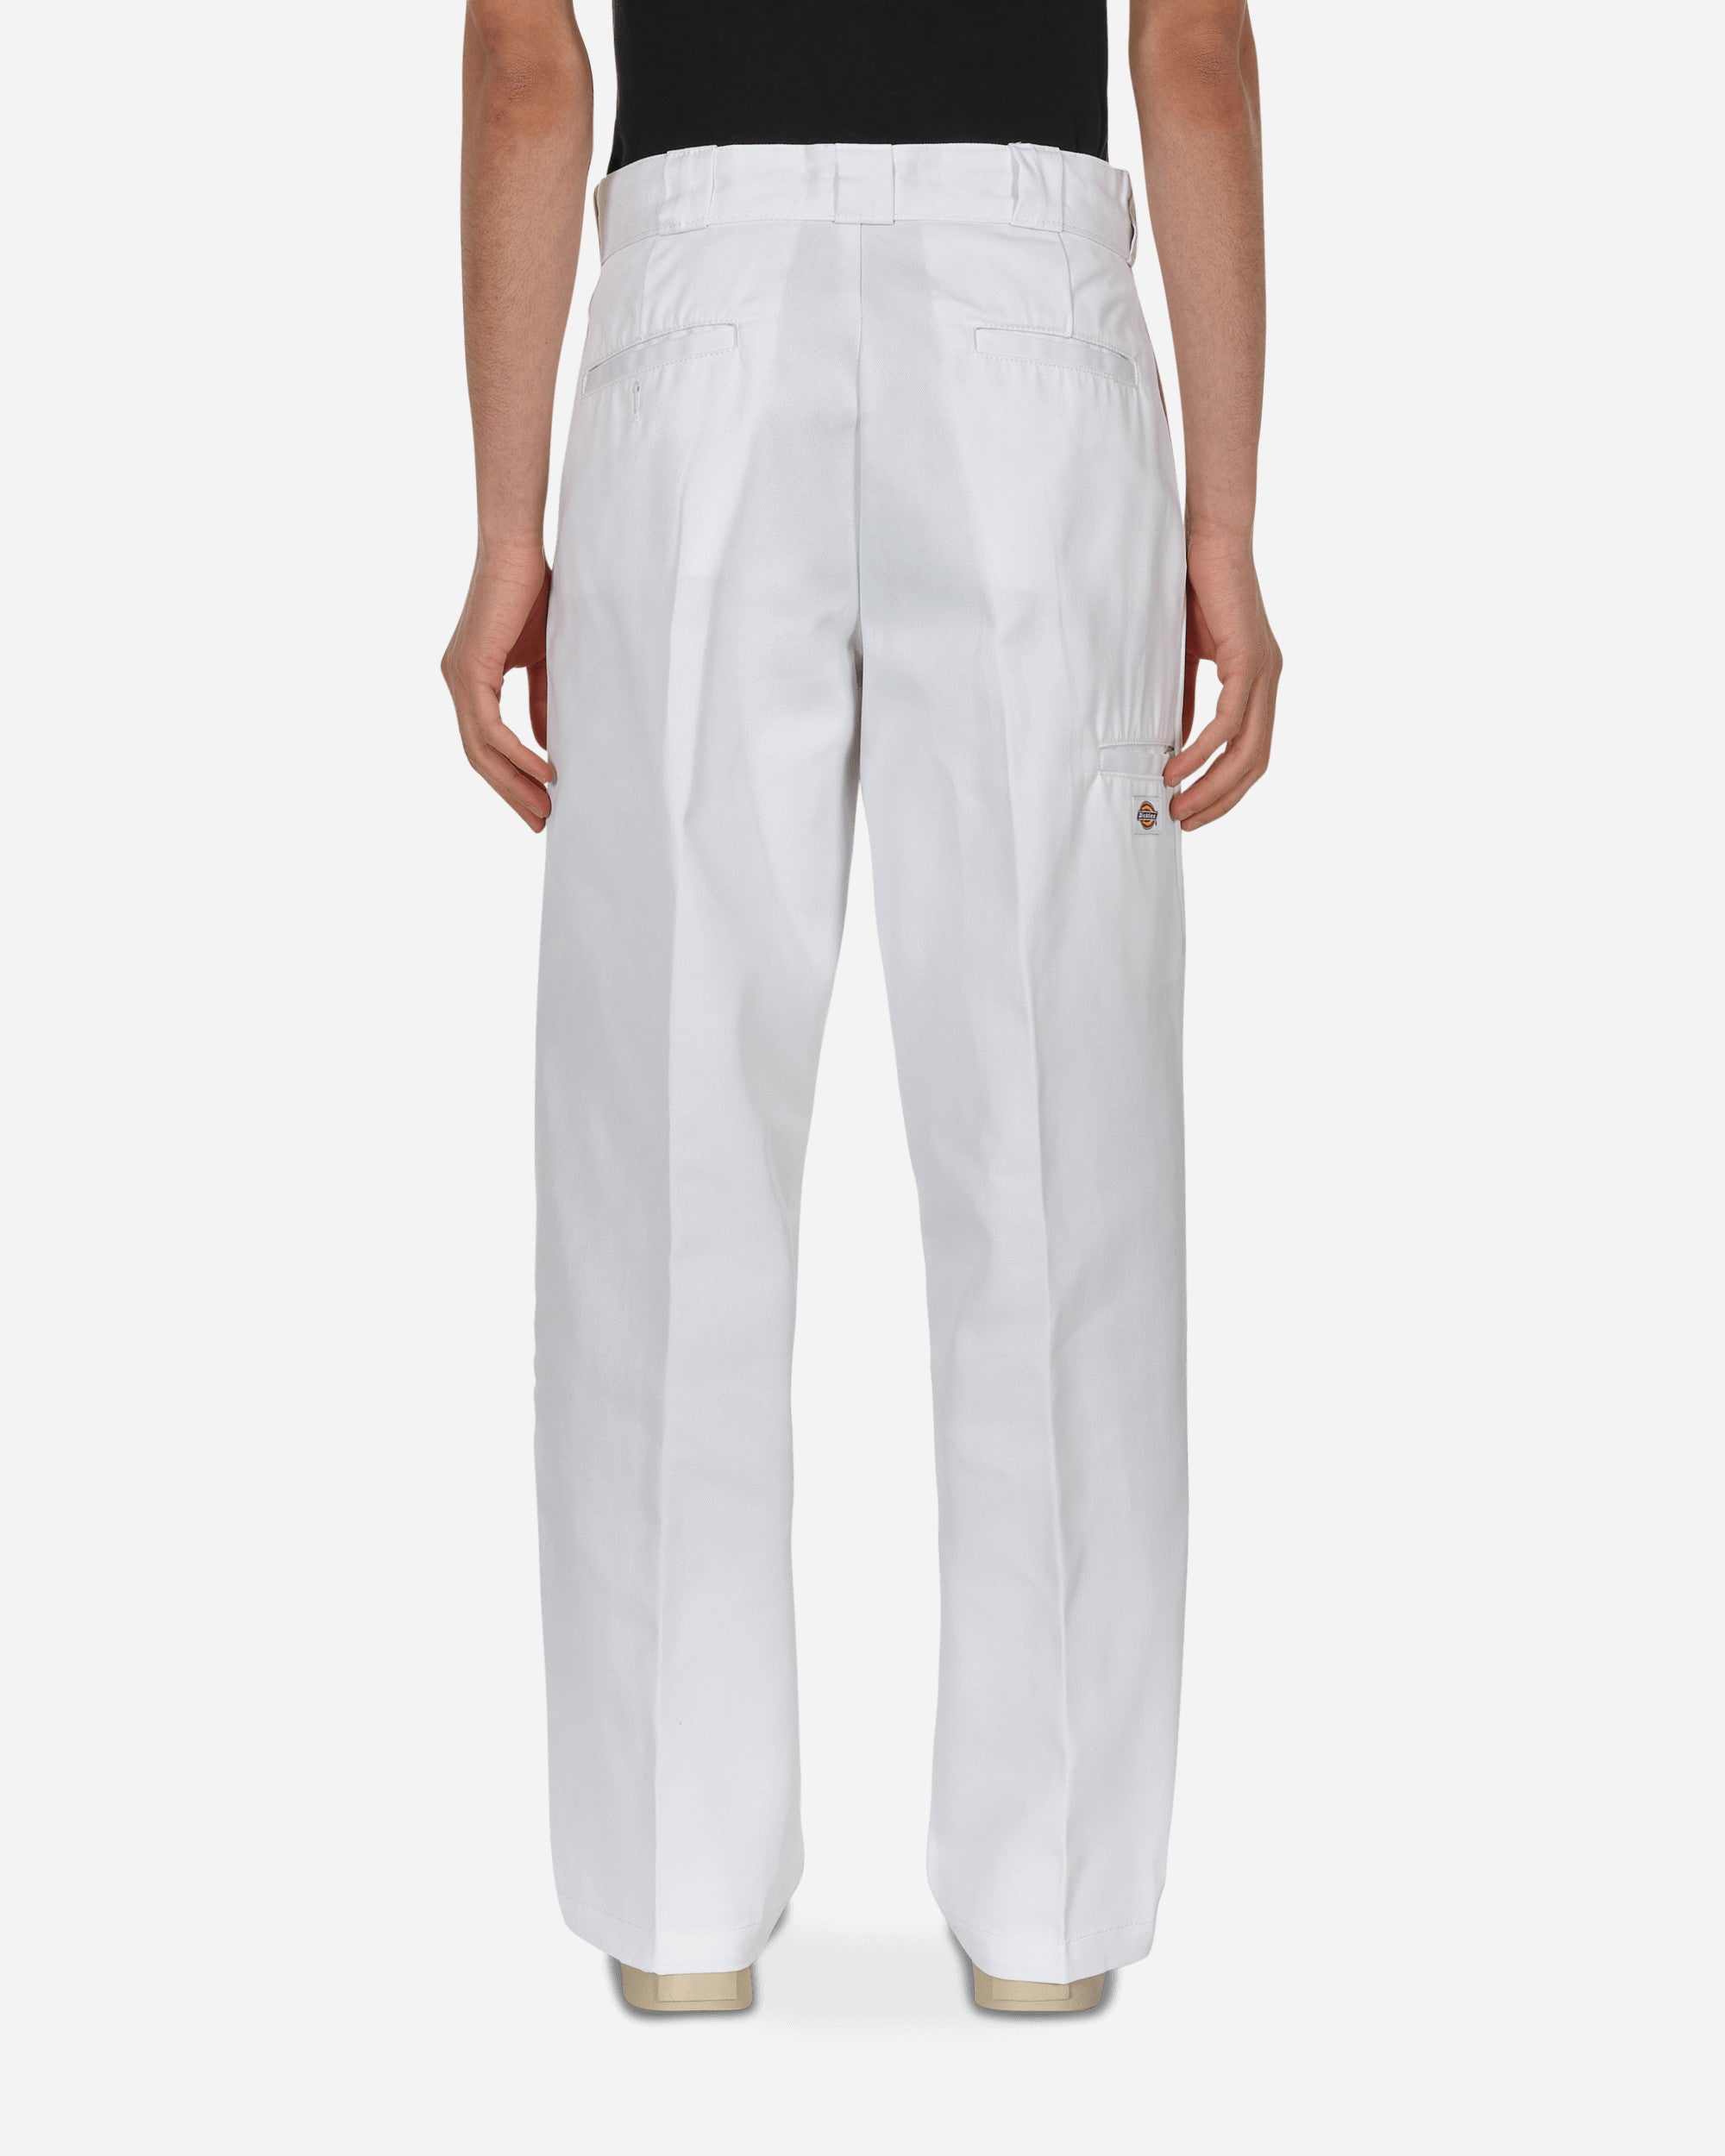 Dickies Double Knee Rec White Pants Trousers DK0A4XK3 WHX1